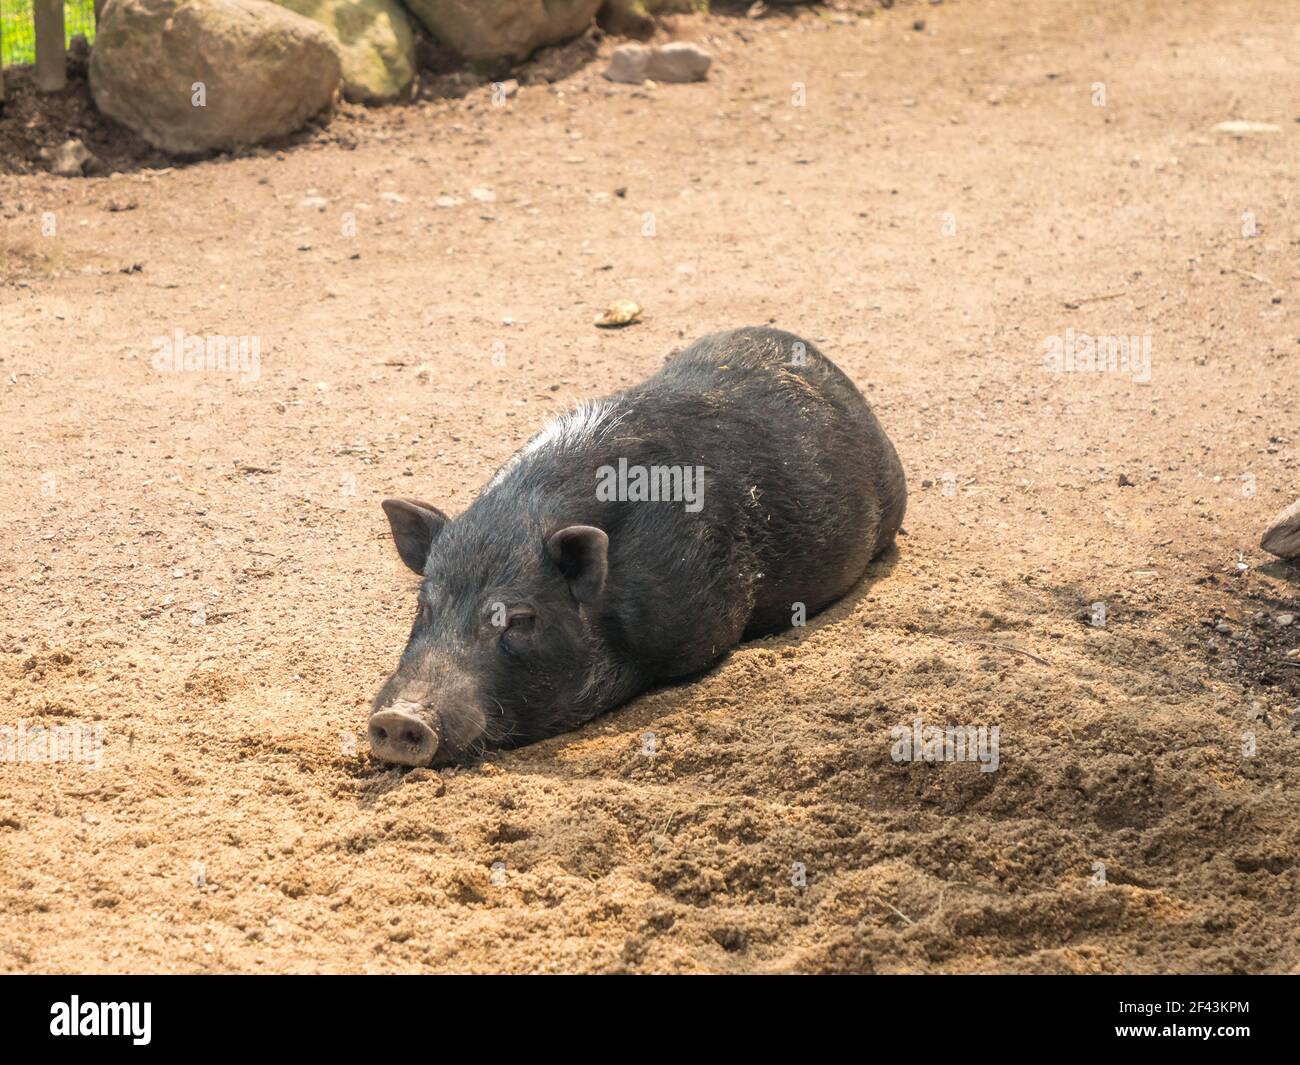 Black mini pig lying in the dirt under the sun with eyes closed. Animal sleeping and enjoying life. Stock Photo